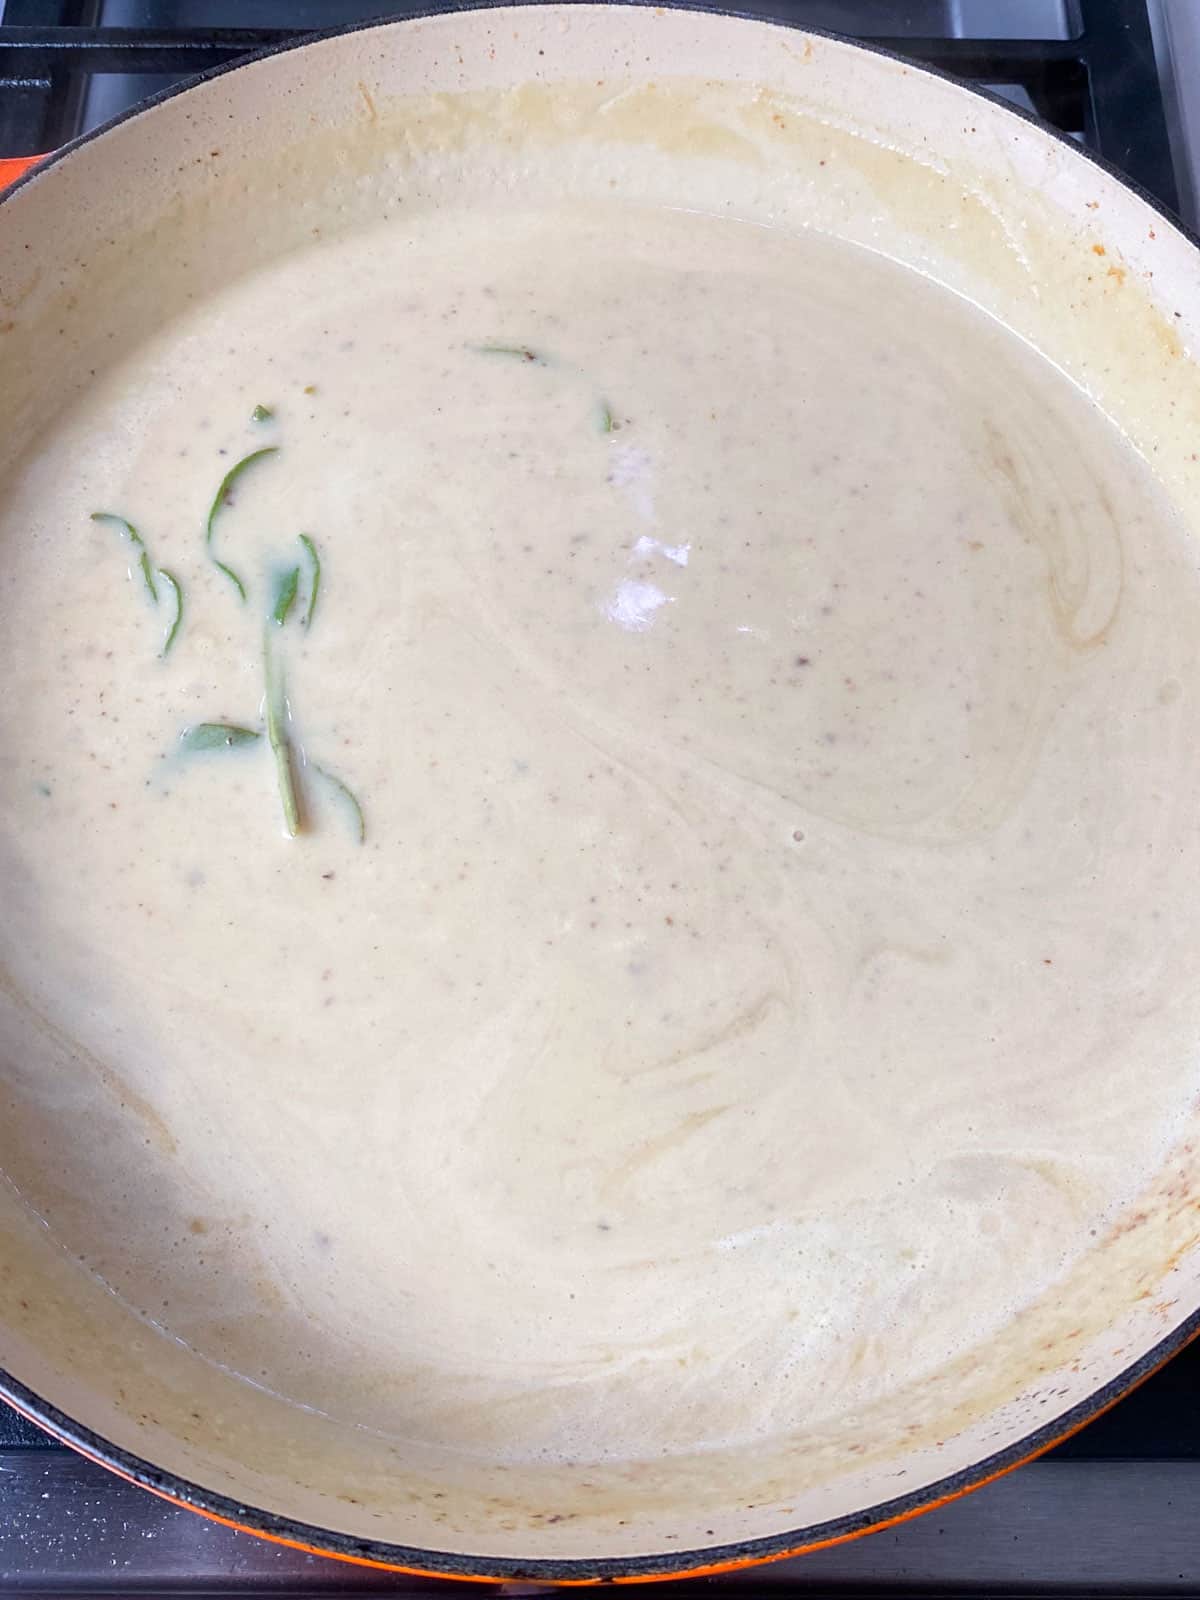 Add the heavy cream to the gravy and stir to combine.